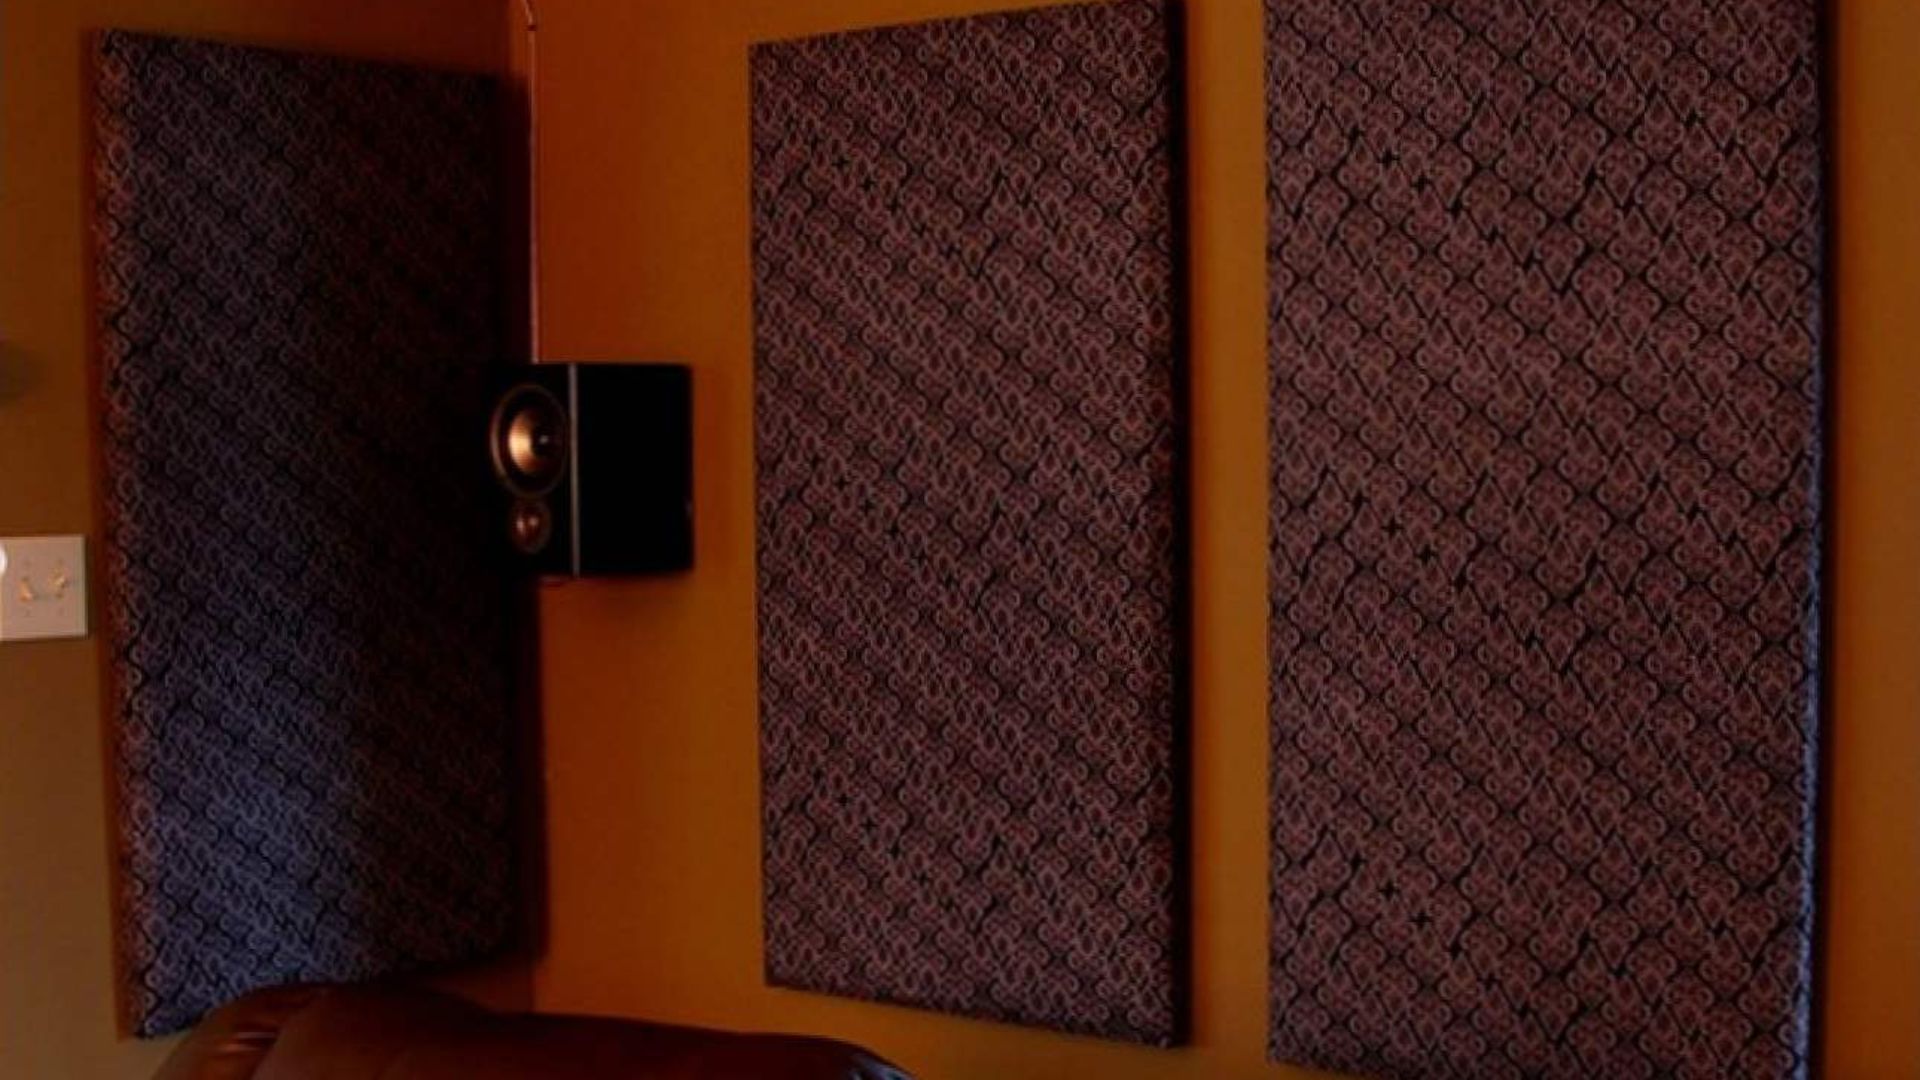 How to choose acoustic panels